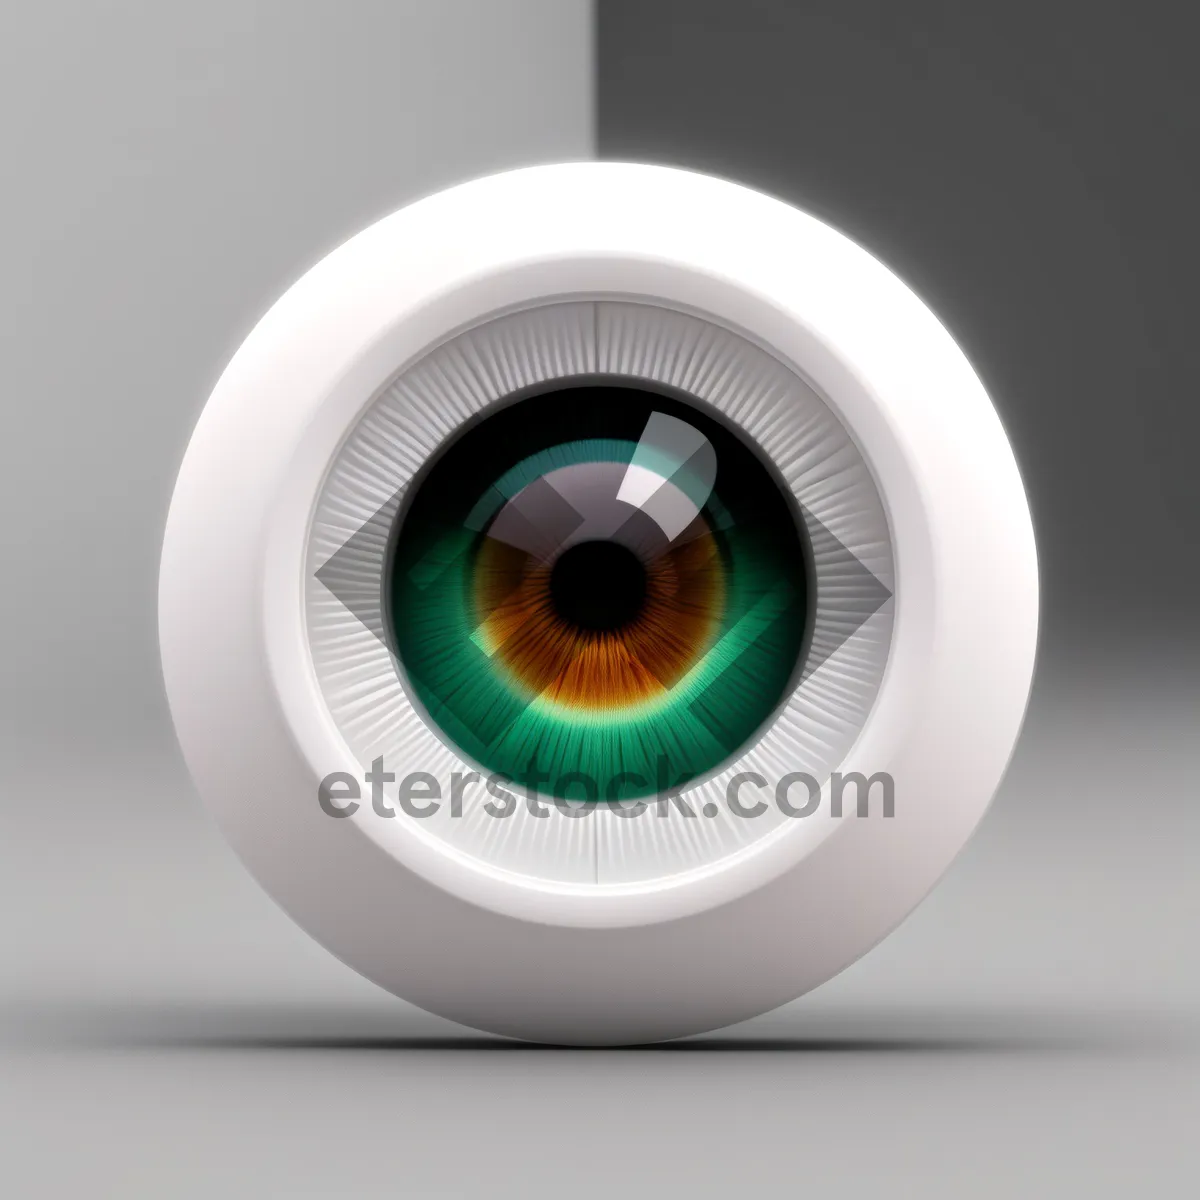 Picture of Shiny Glass Web Button: Modern Round Symbol